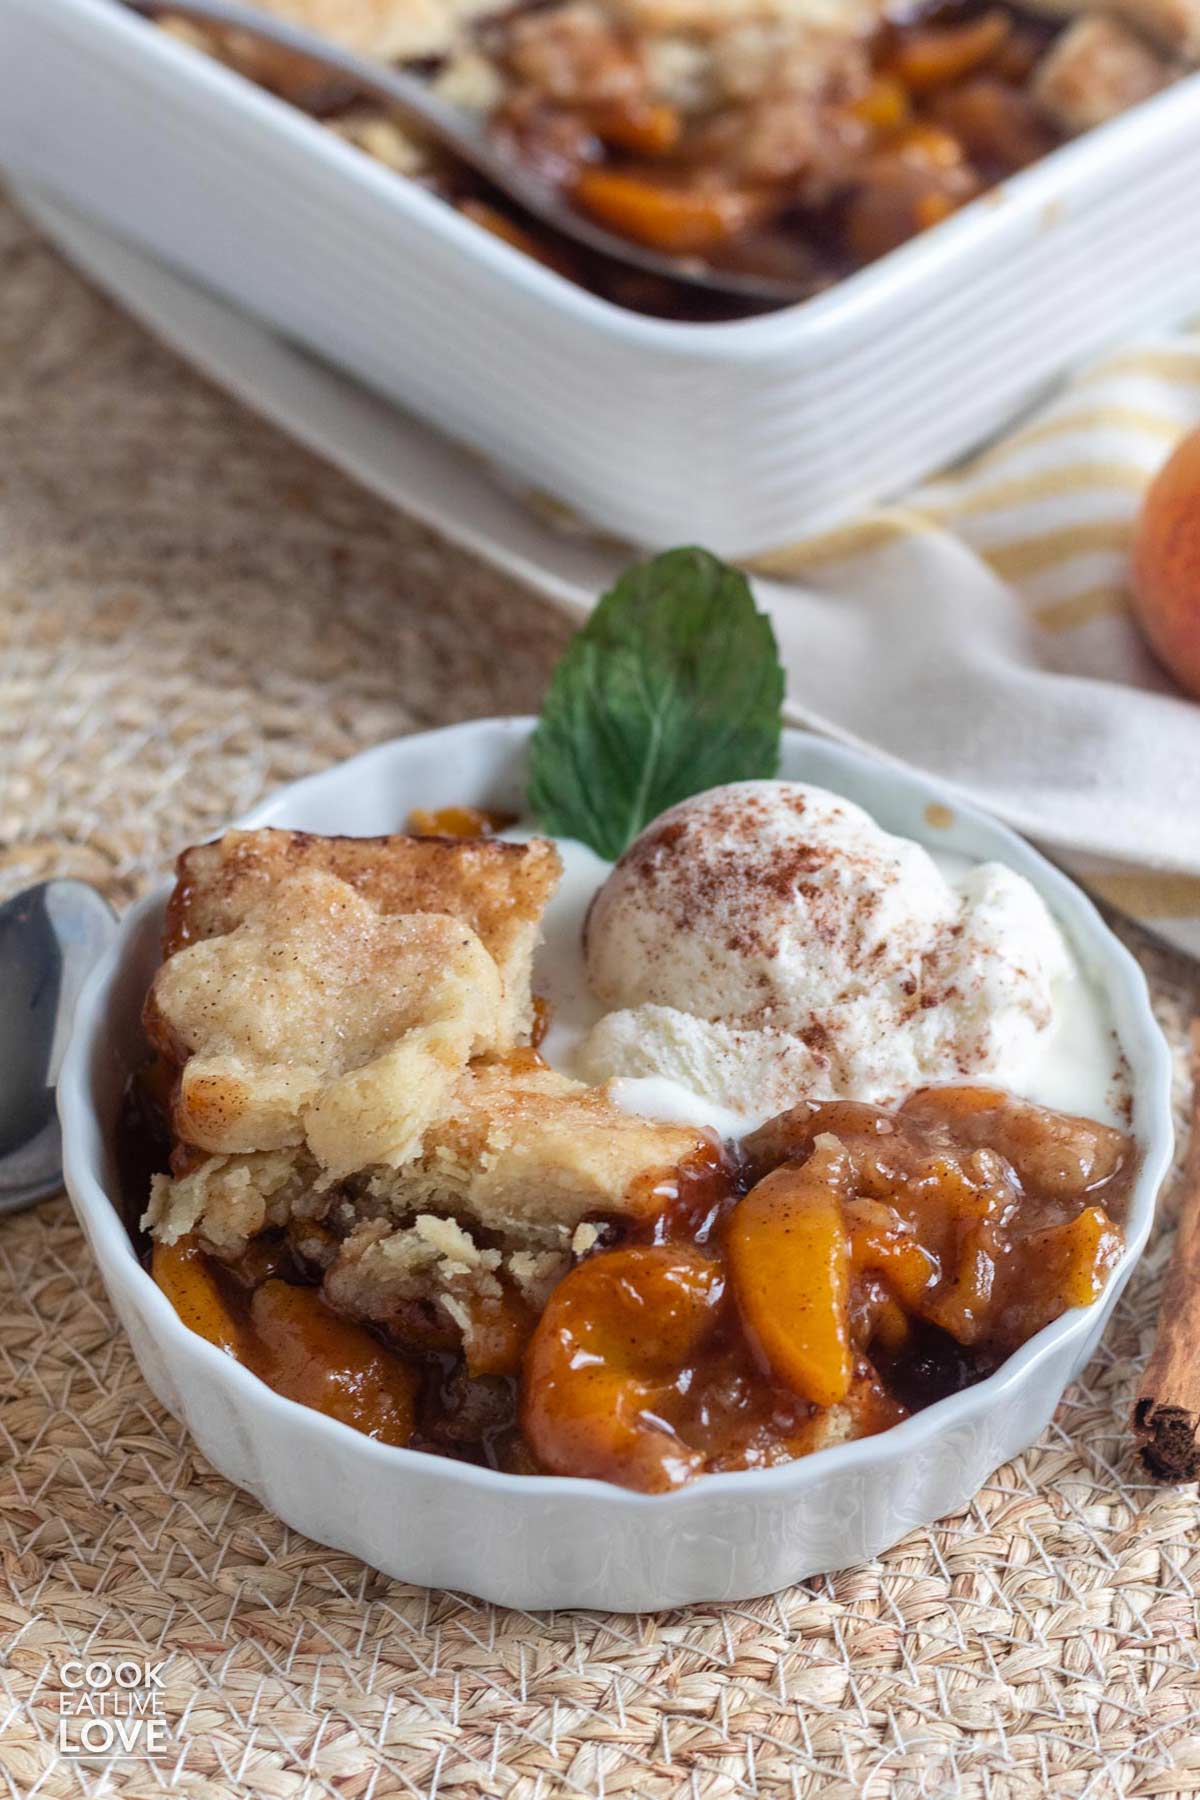 A close up of vegan peach cobbler with ice cream in a small dish.